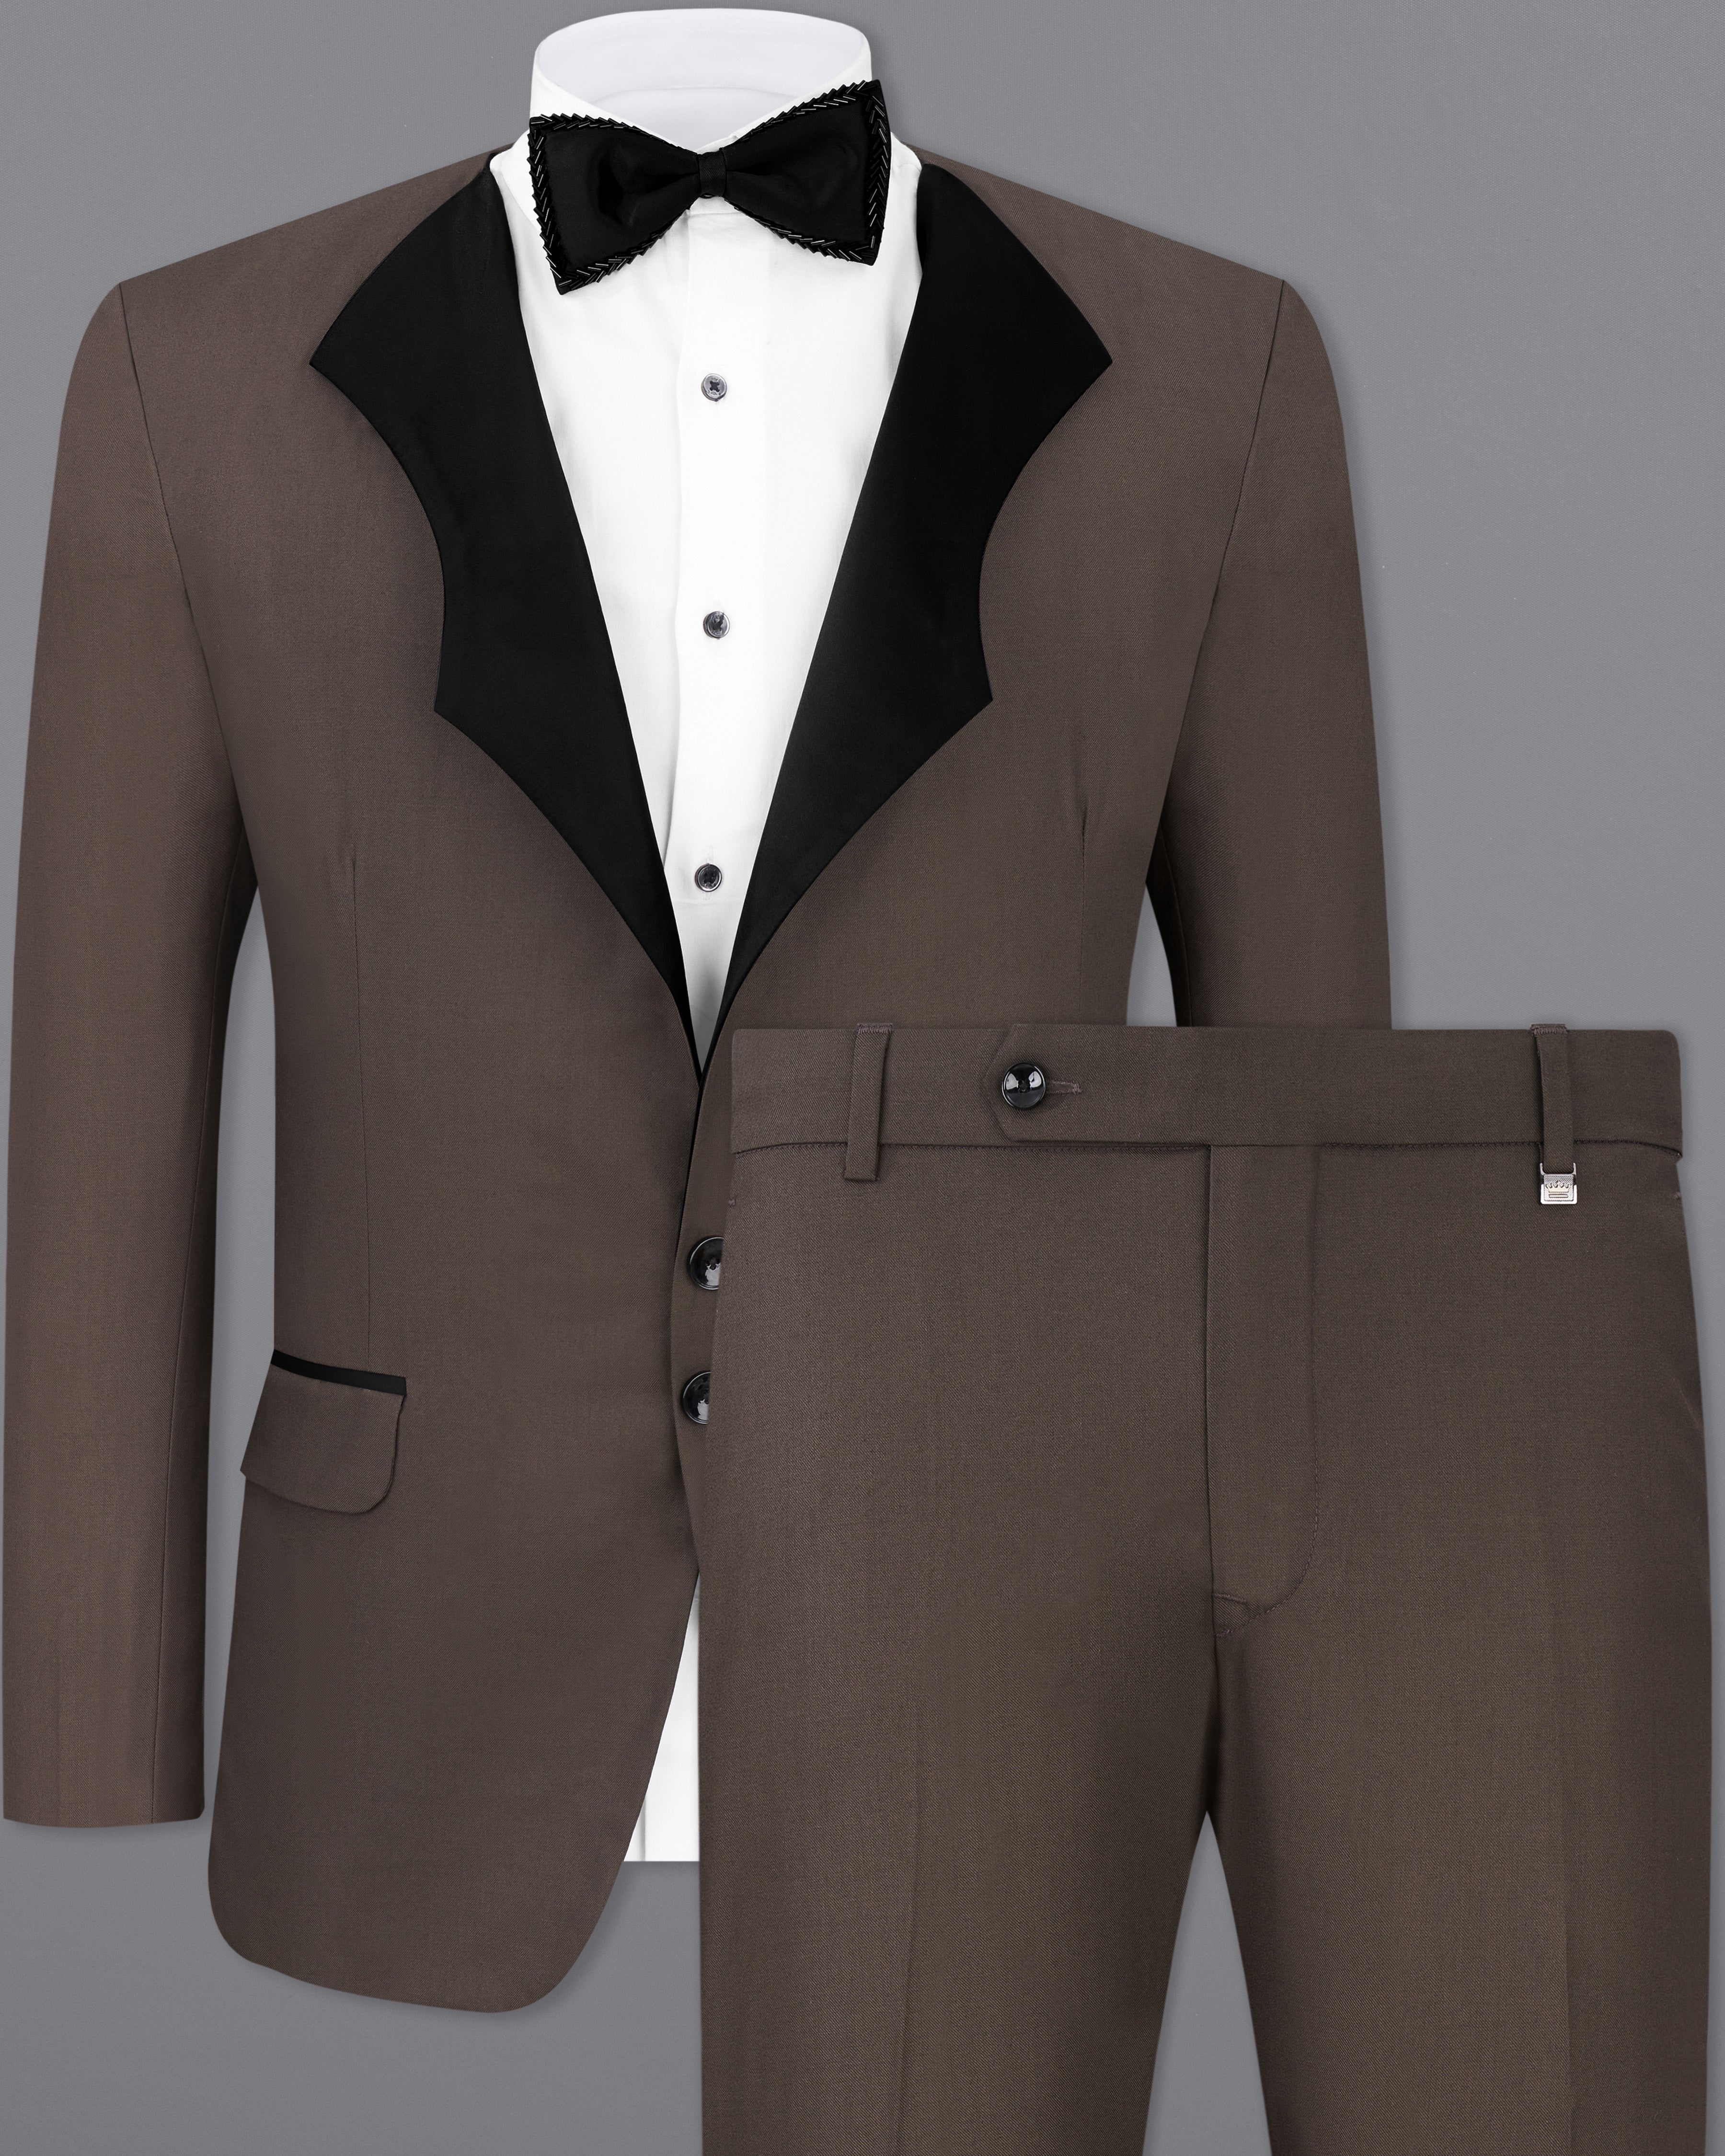 Aggregate more than 260 grey tuxedo suit best